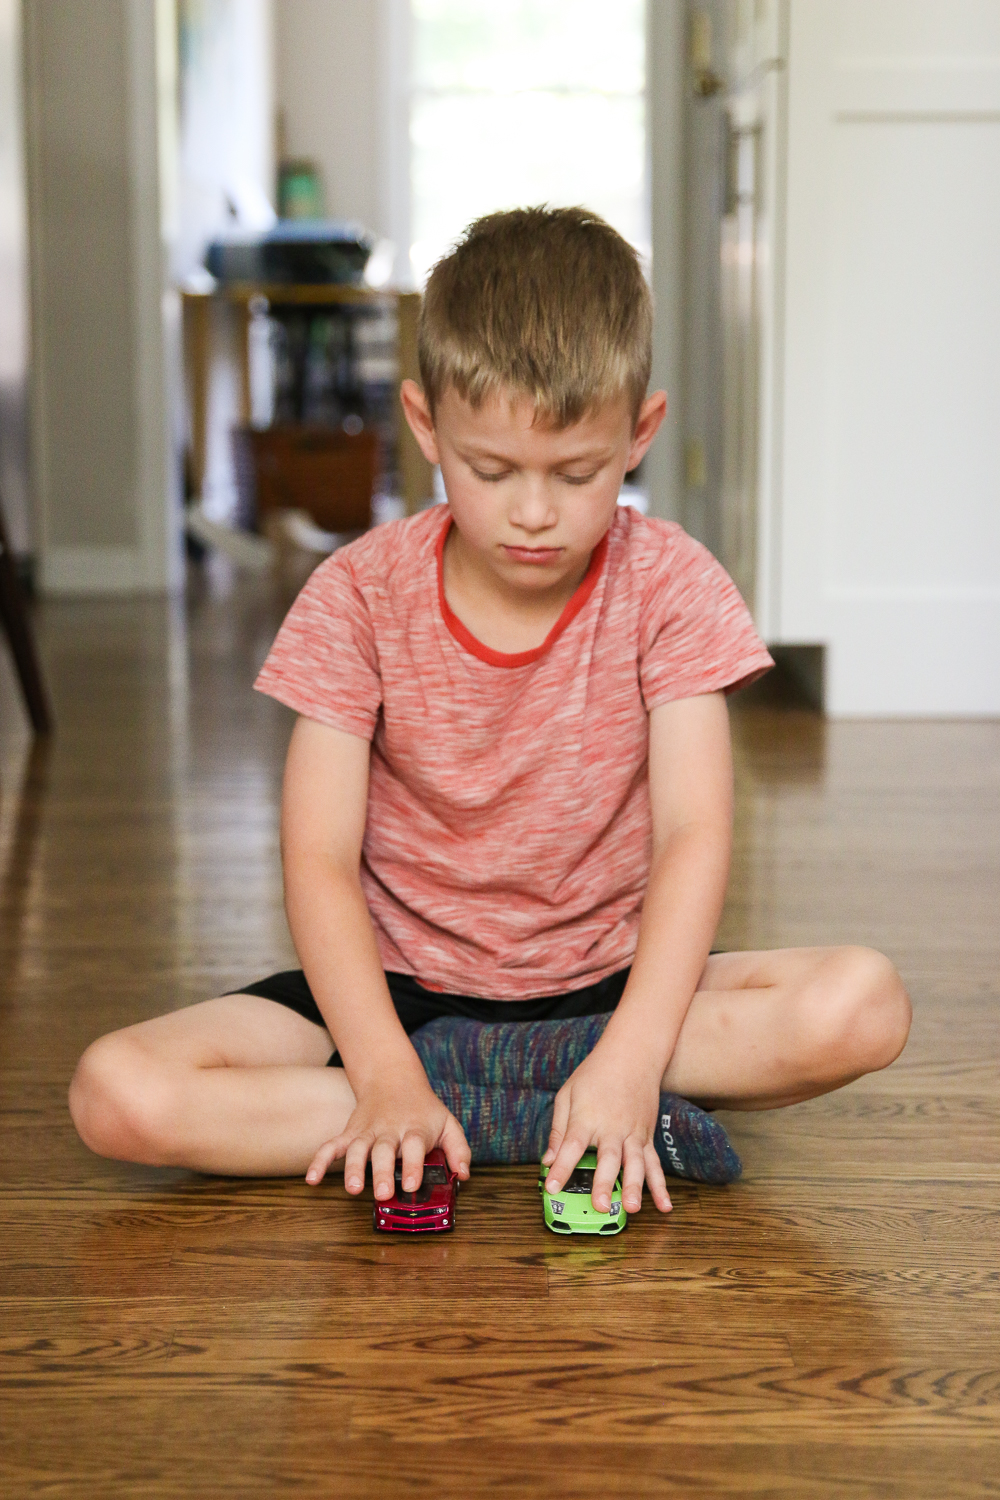 Boy sitting on hardwood floor playing with two toy cars